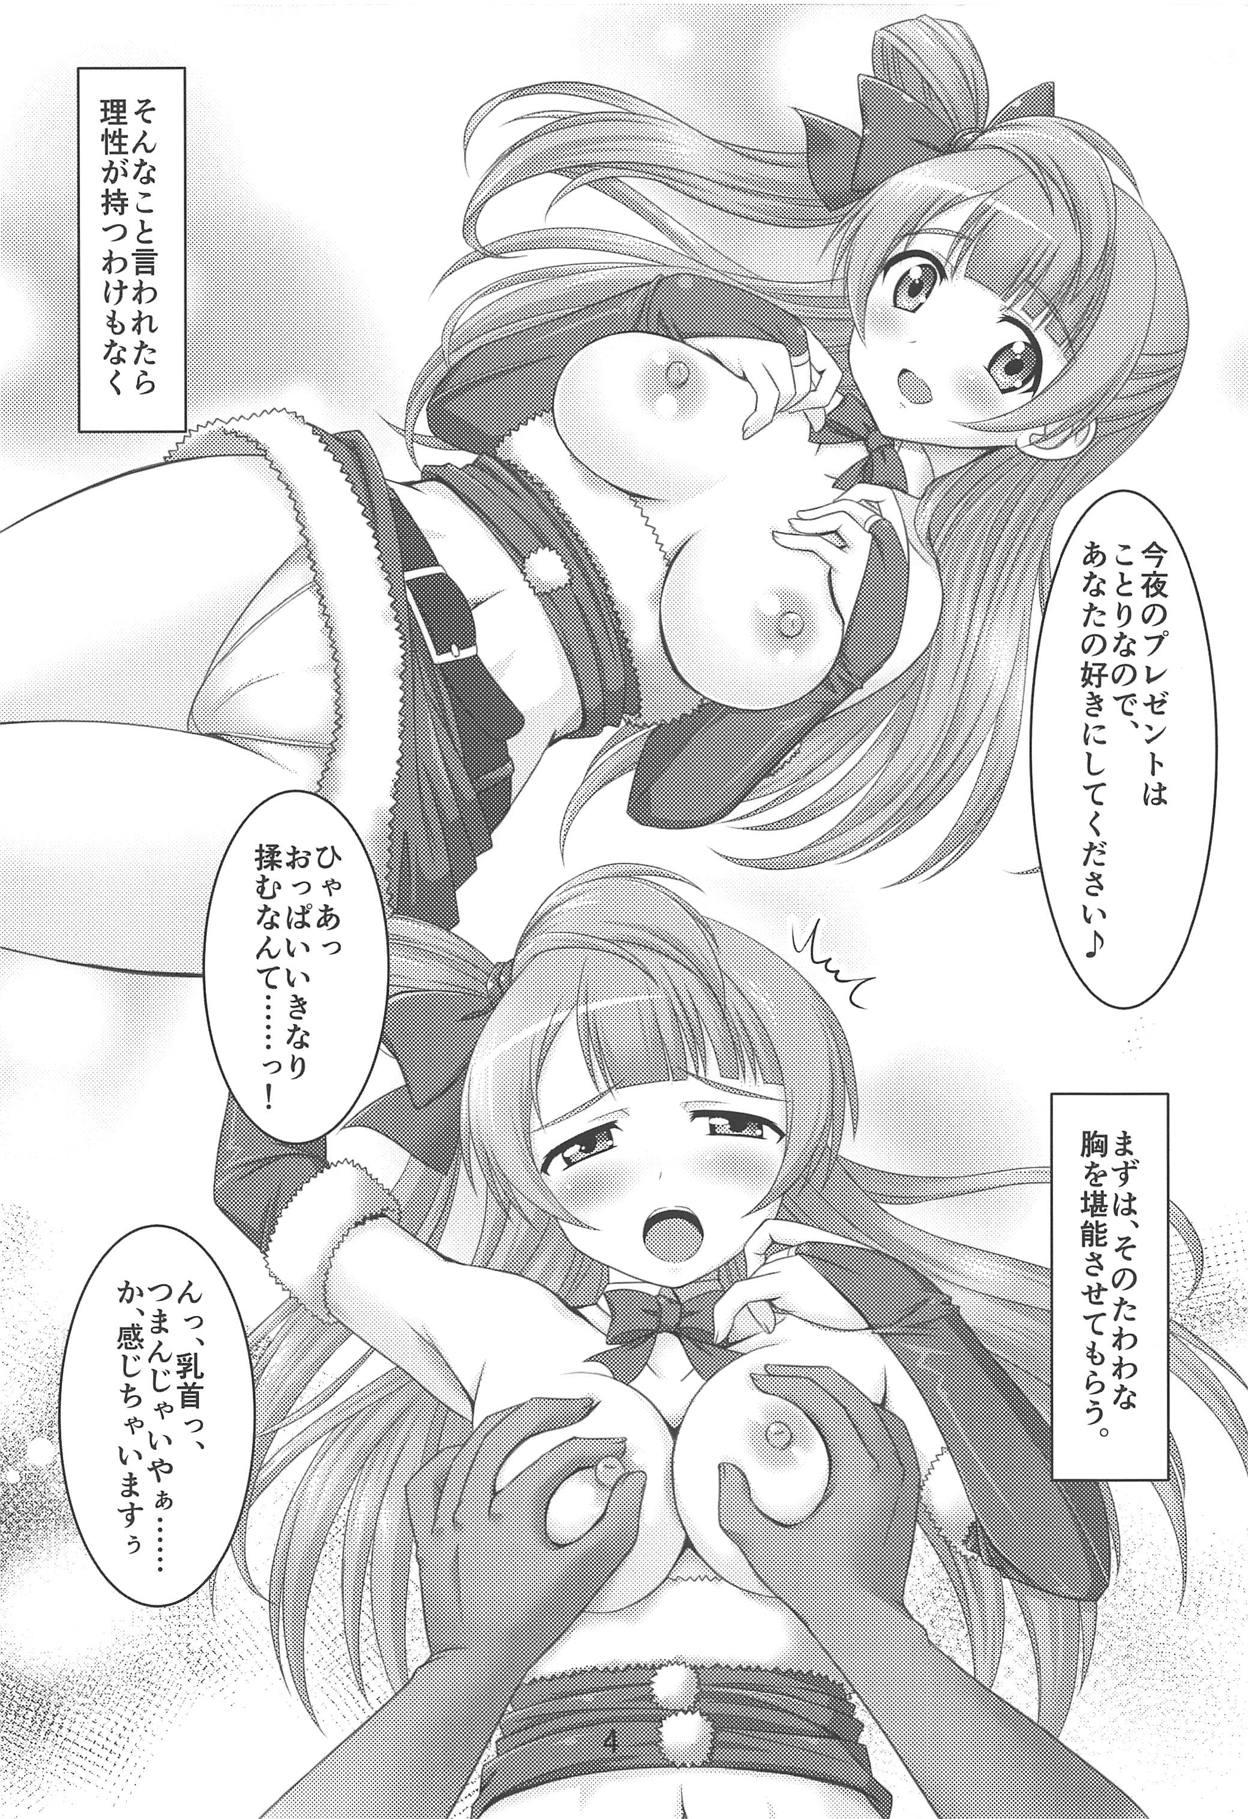 Hot Girl Kotori to Asa made Issho 3 - Love live Huge - Page 3